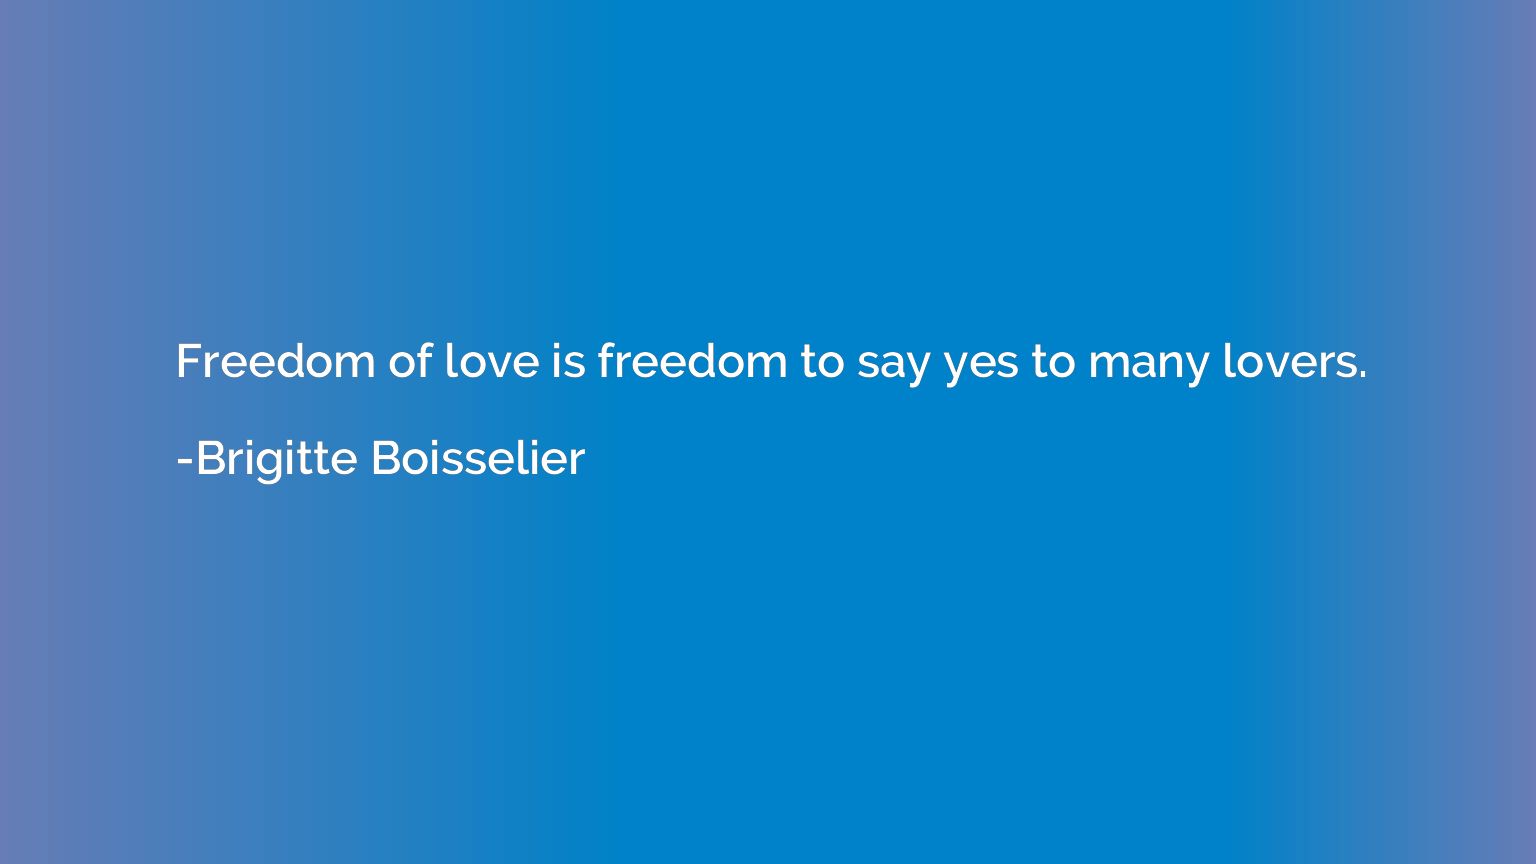 Freedom of love is freedom to say yes to many lovers.